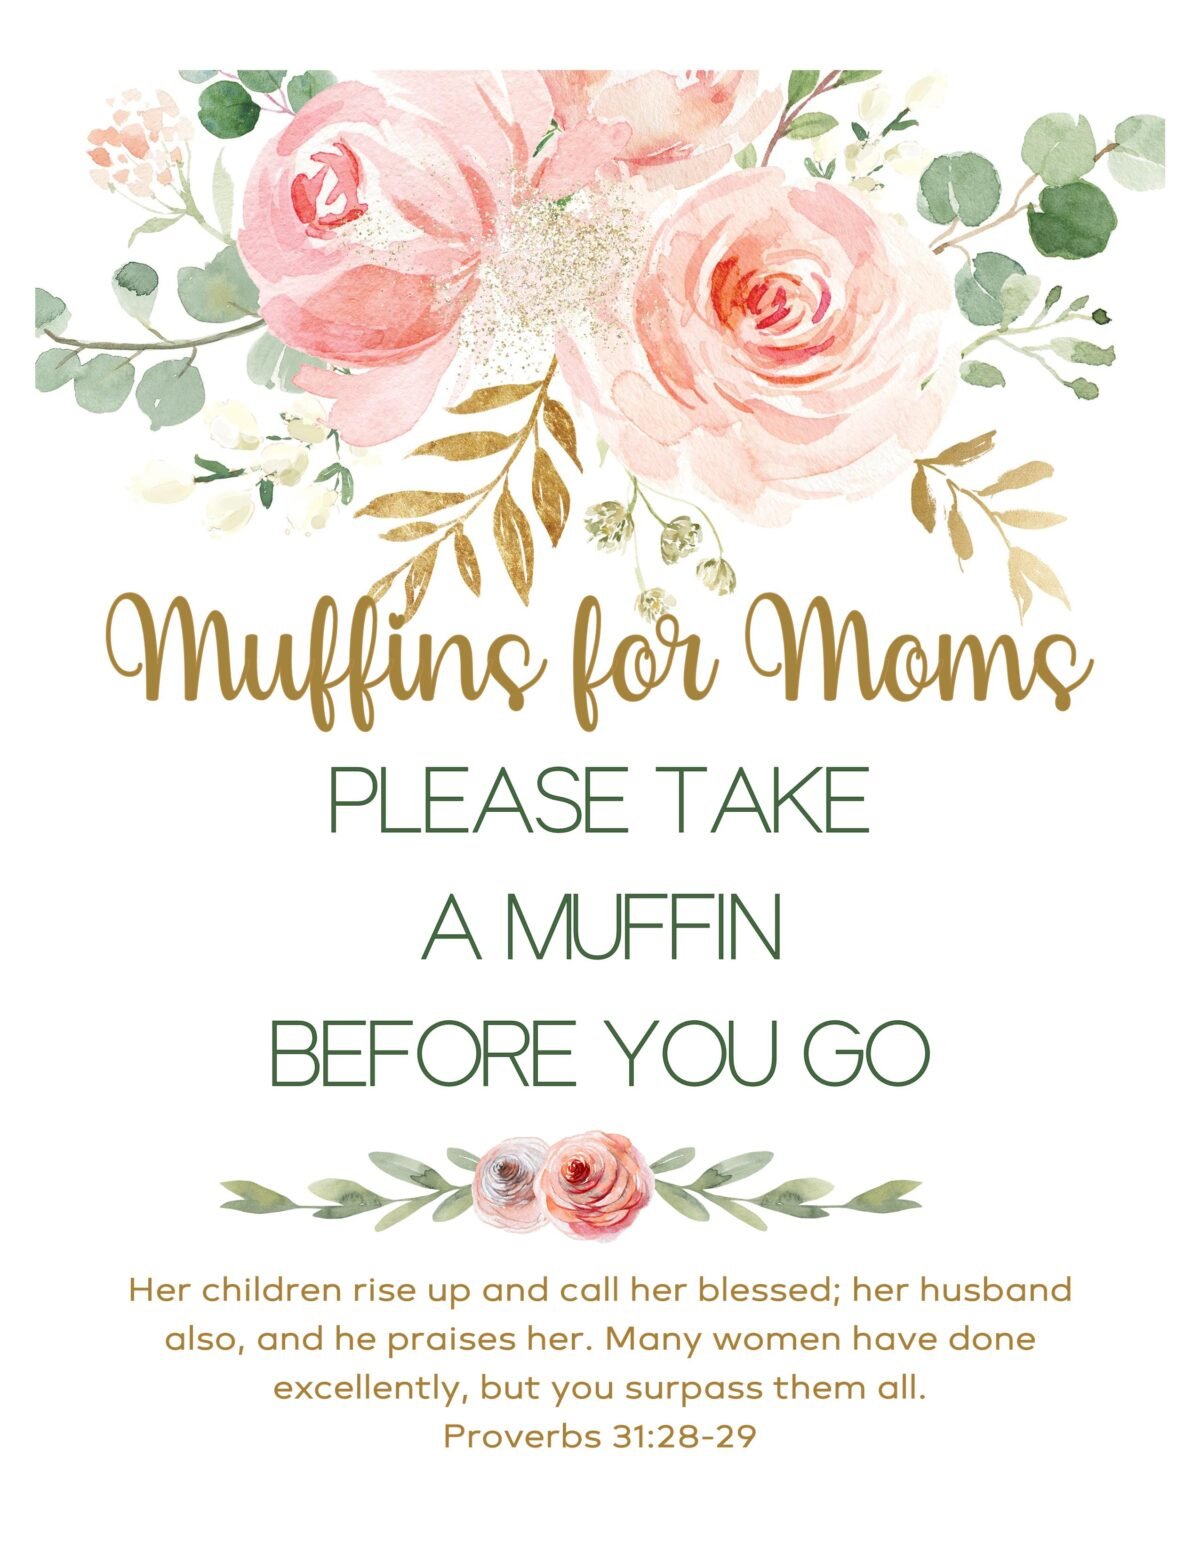 How to Plan a Muffins for Moms Event